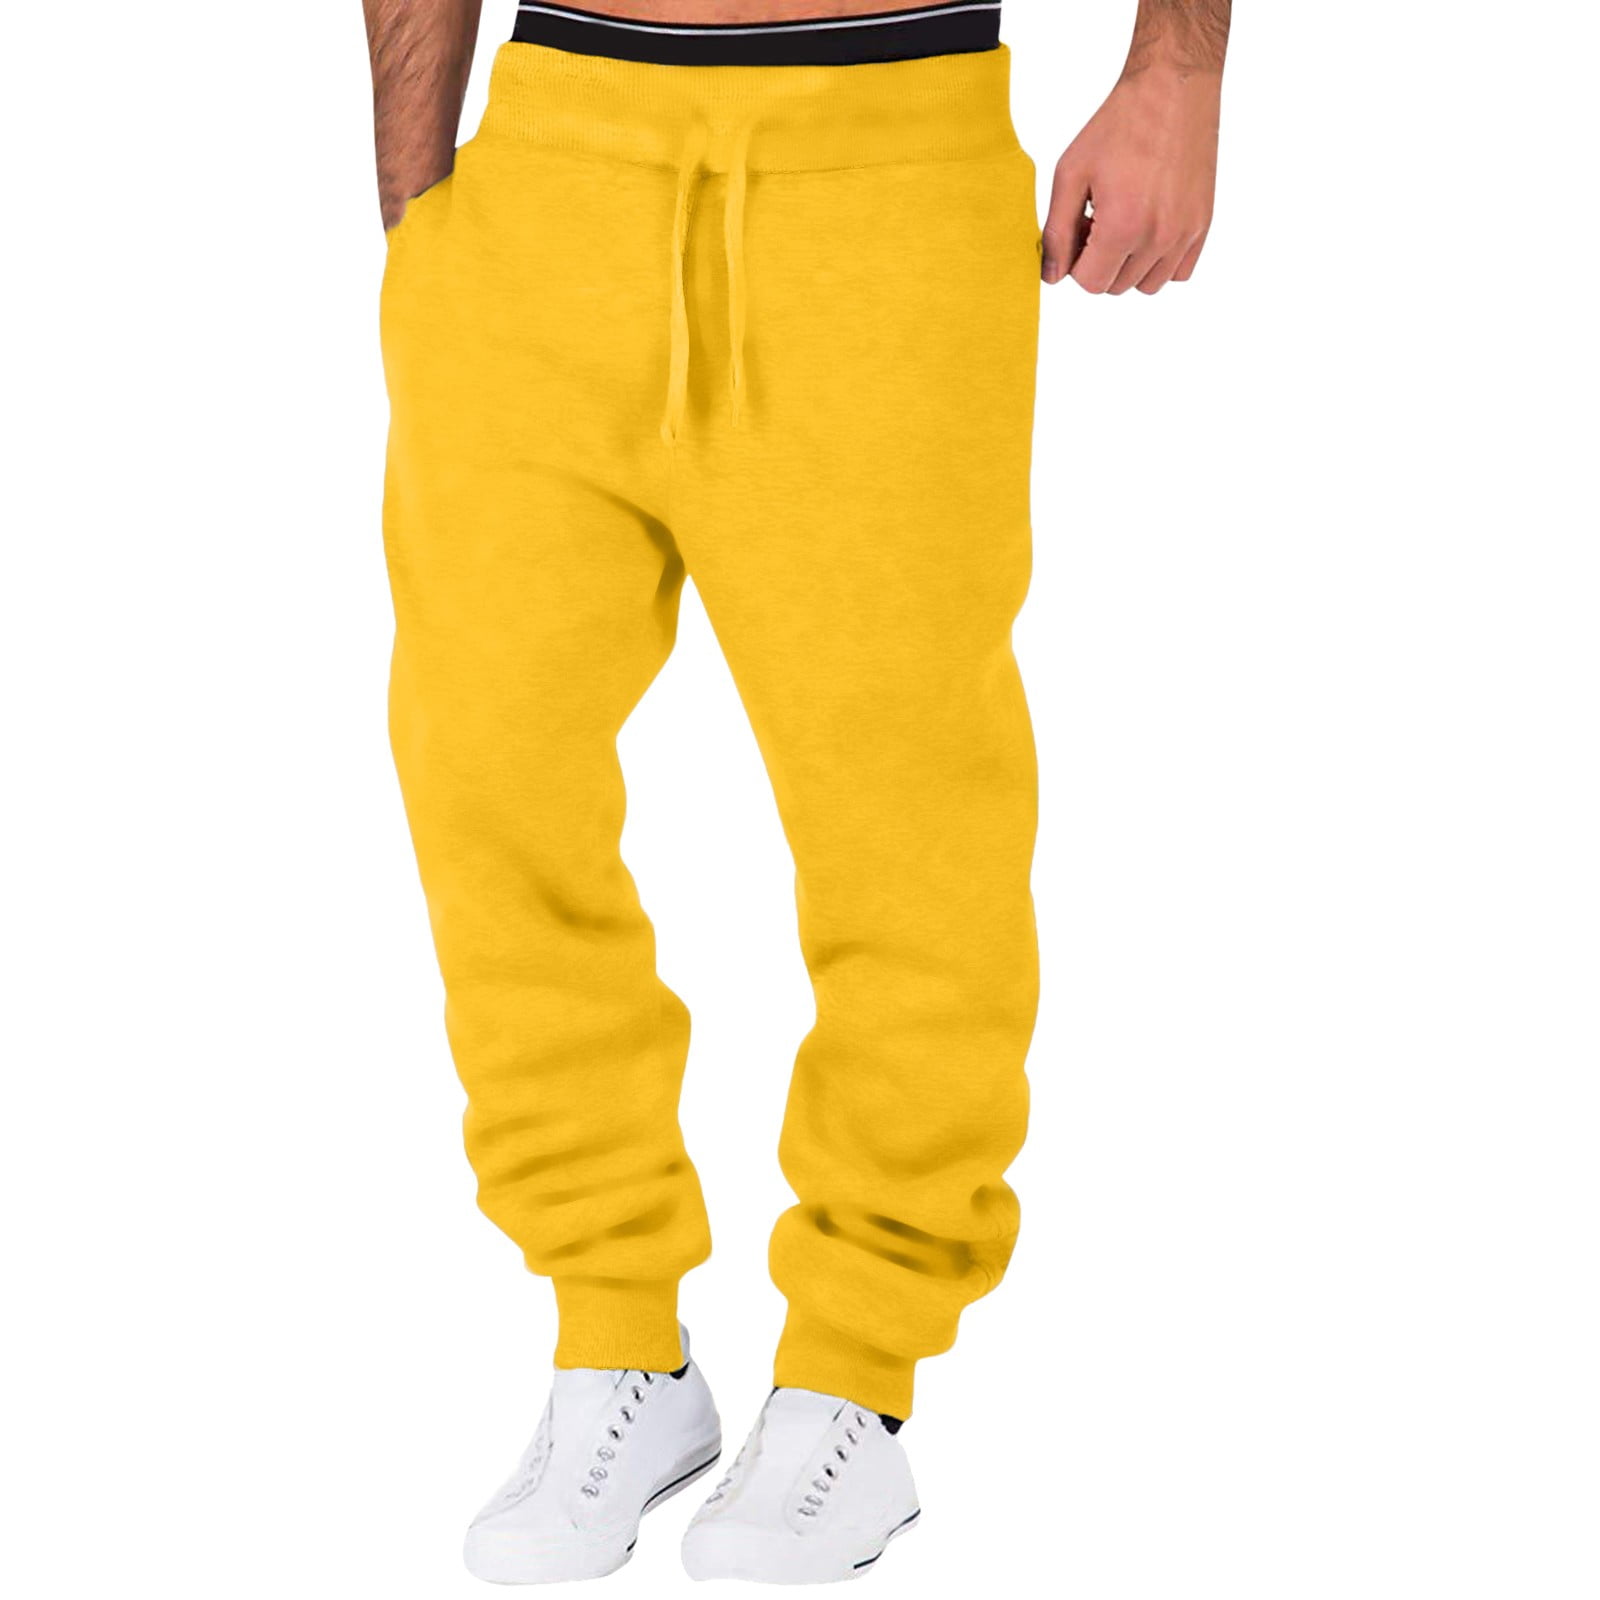 ZHAGHMIN Pants For Men Male Casual Fitness Running Trousers Drawstring  Loose Waist Solid Color Pants Pocket Loose Sweatpants 8 Simple Open Leg  Pants Stocking Gift Boy 10 Memory Foam 